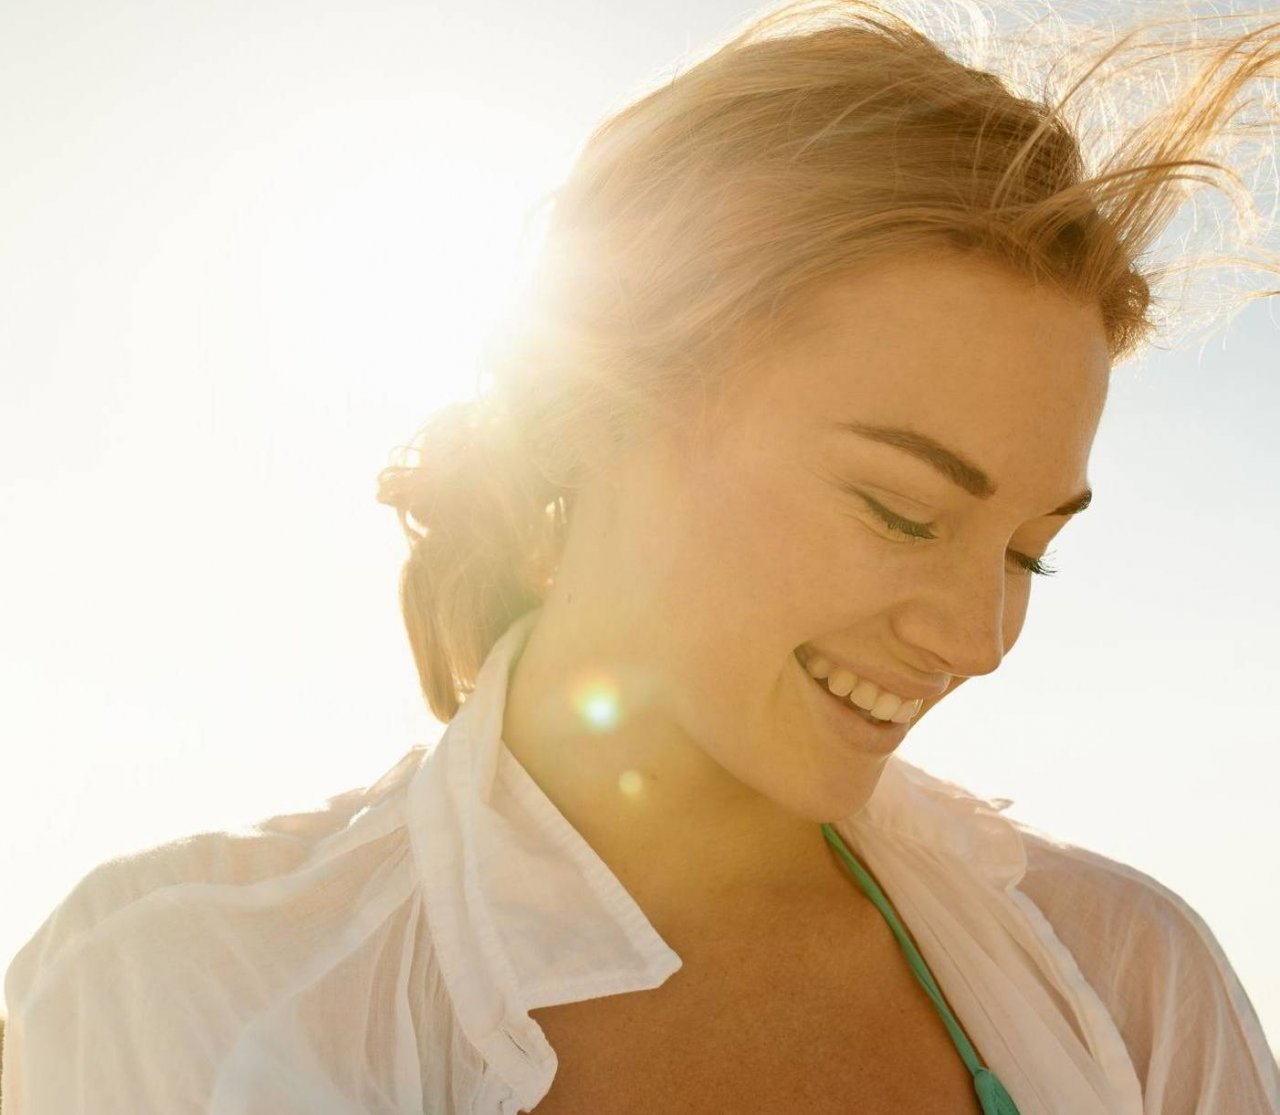 A woman looks at the ground in the sunlight and smiles